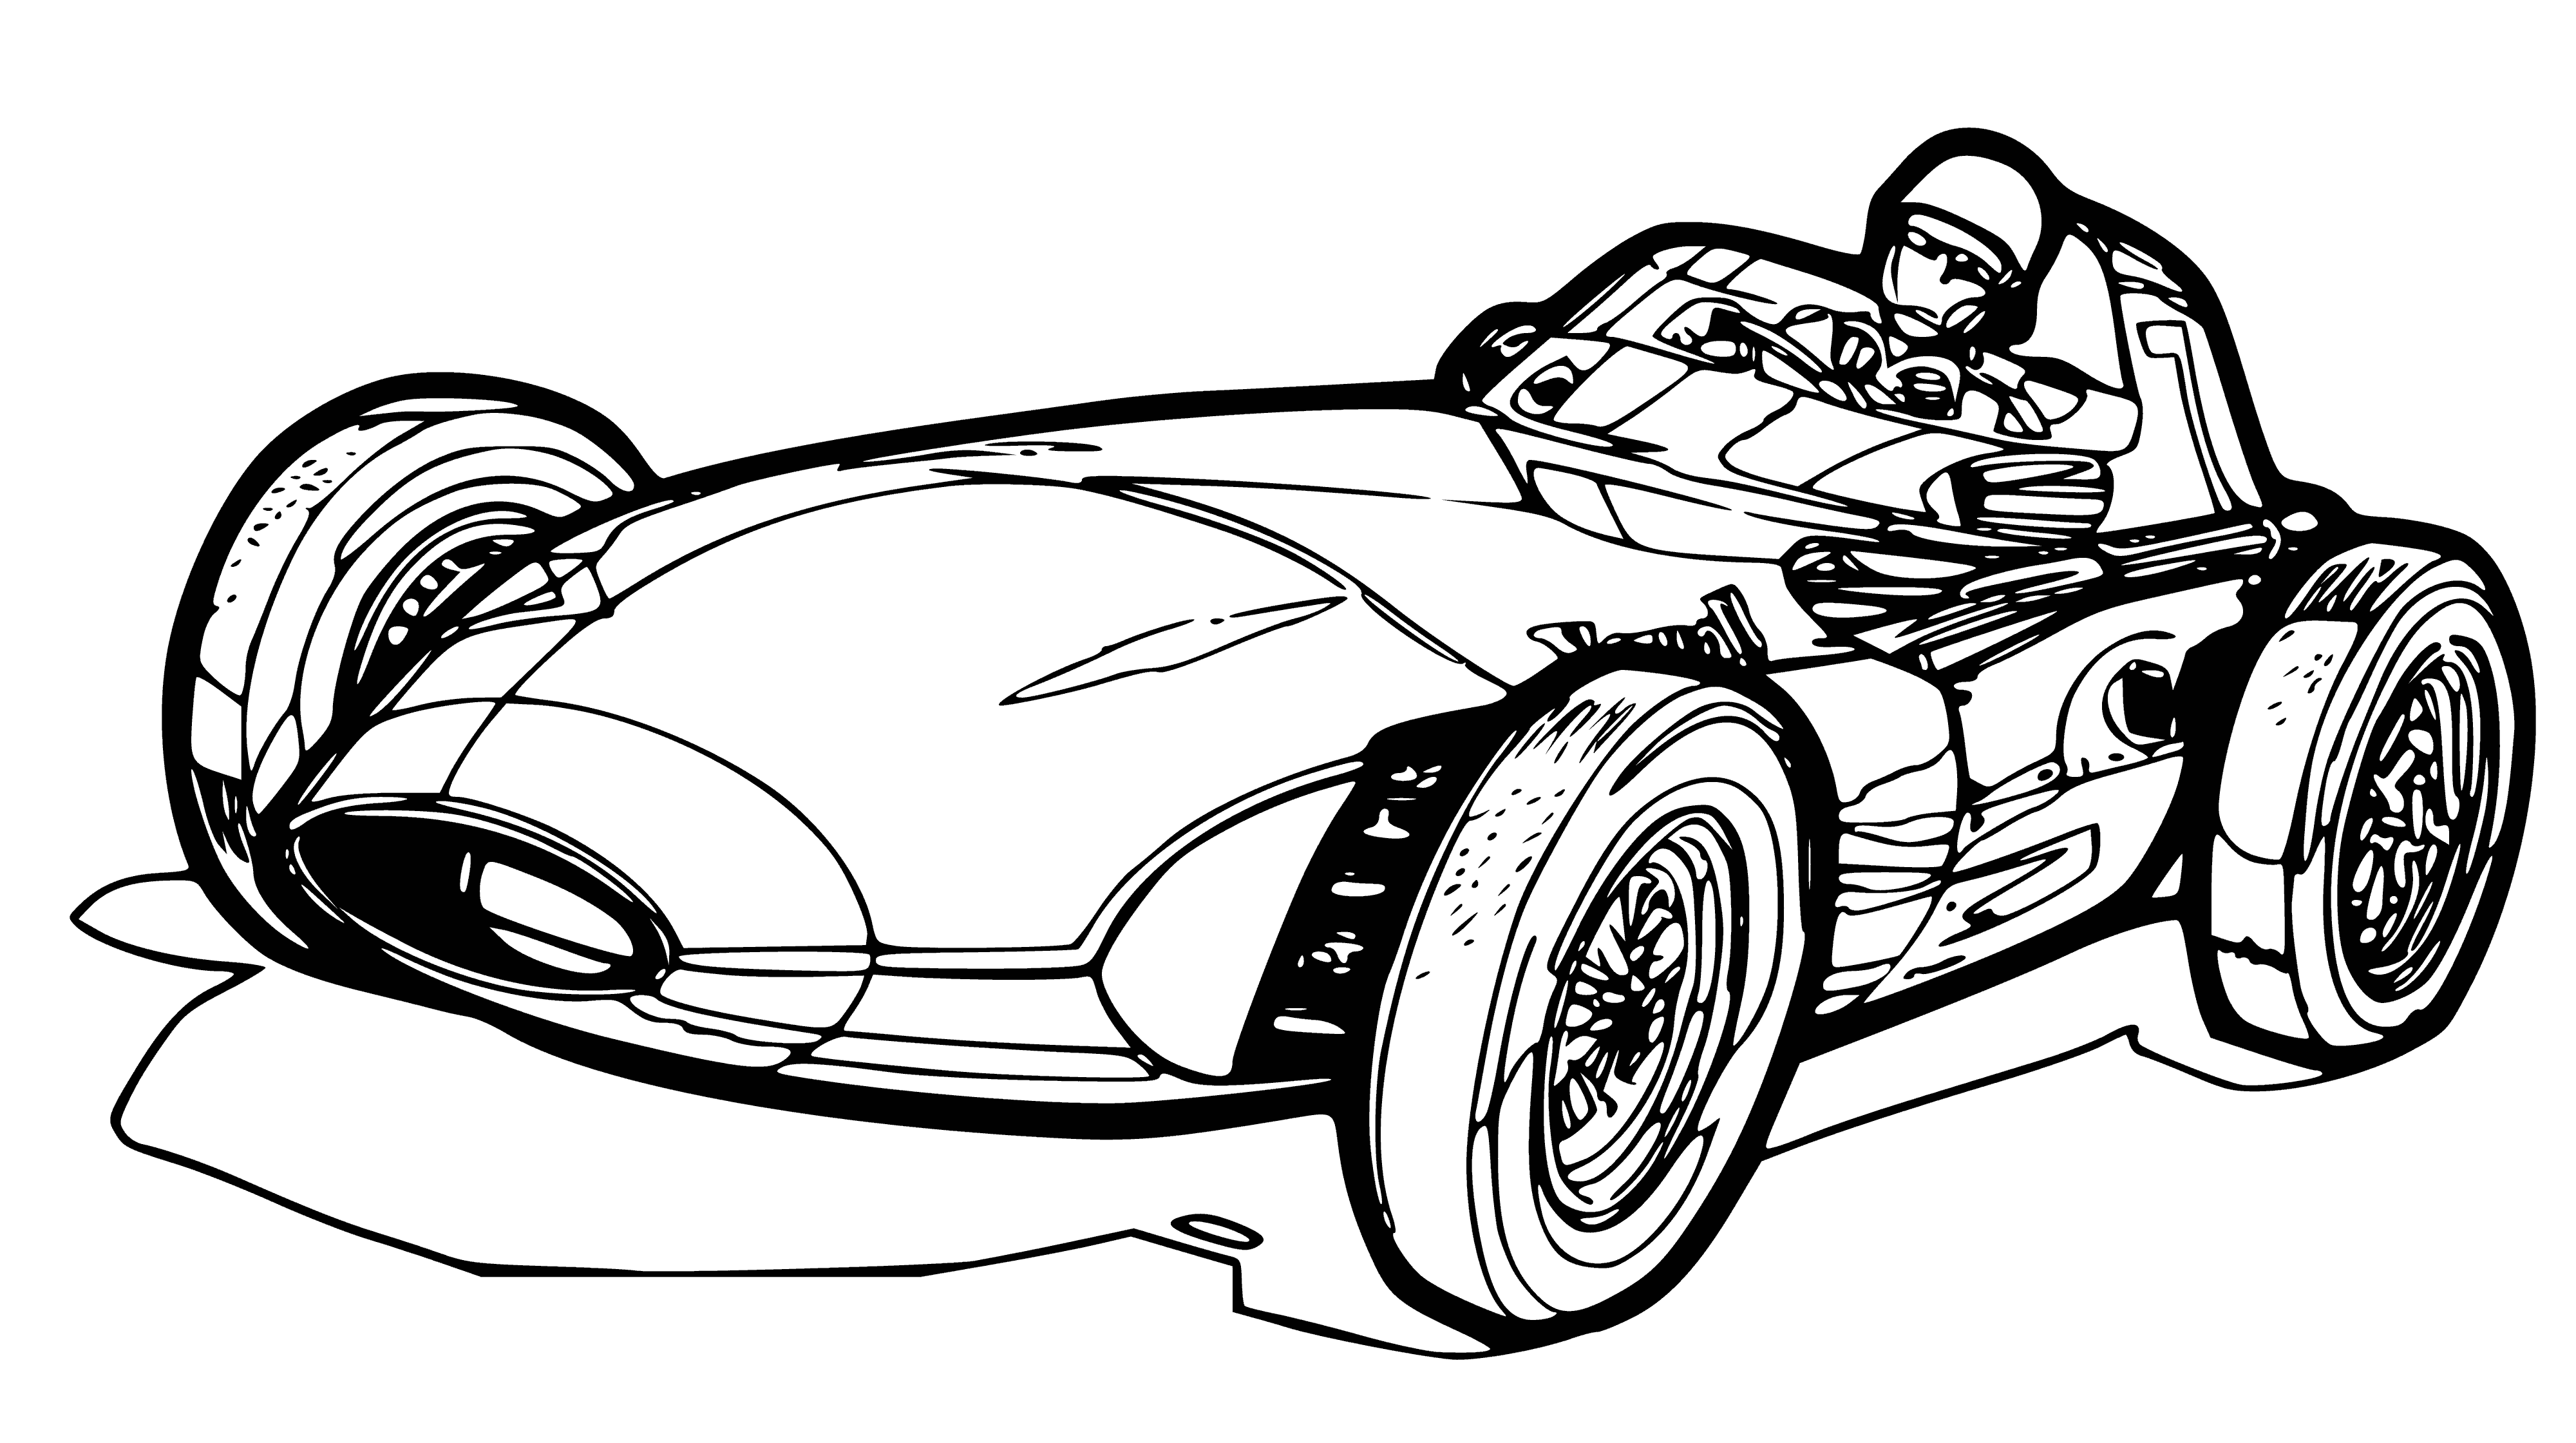 coloring page: Two red Formula 1 cars from 1958: foreground on track, background on rally. #coloringpage #classiccars